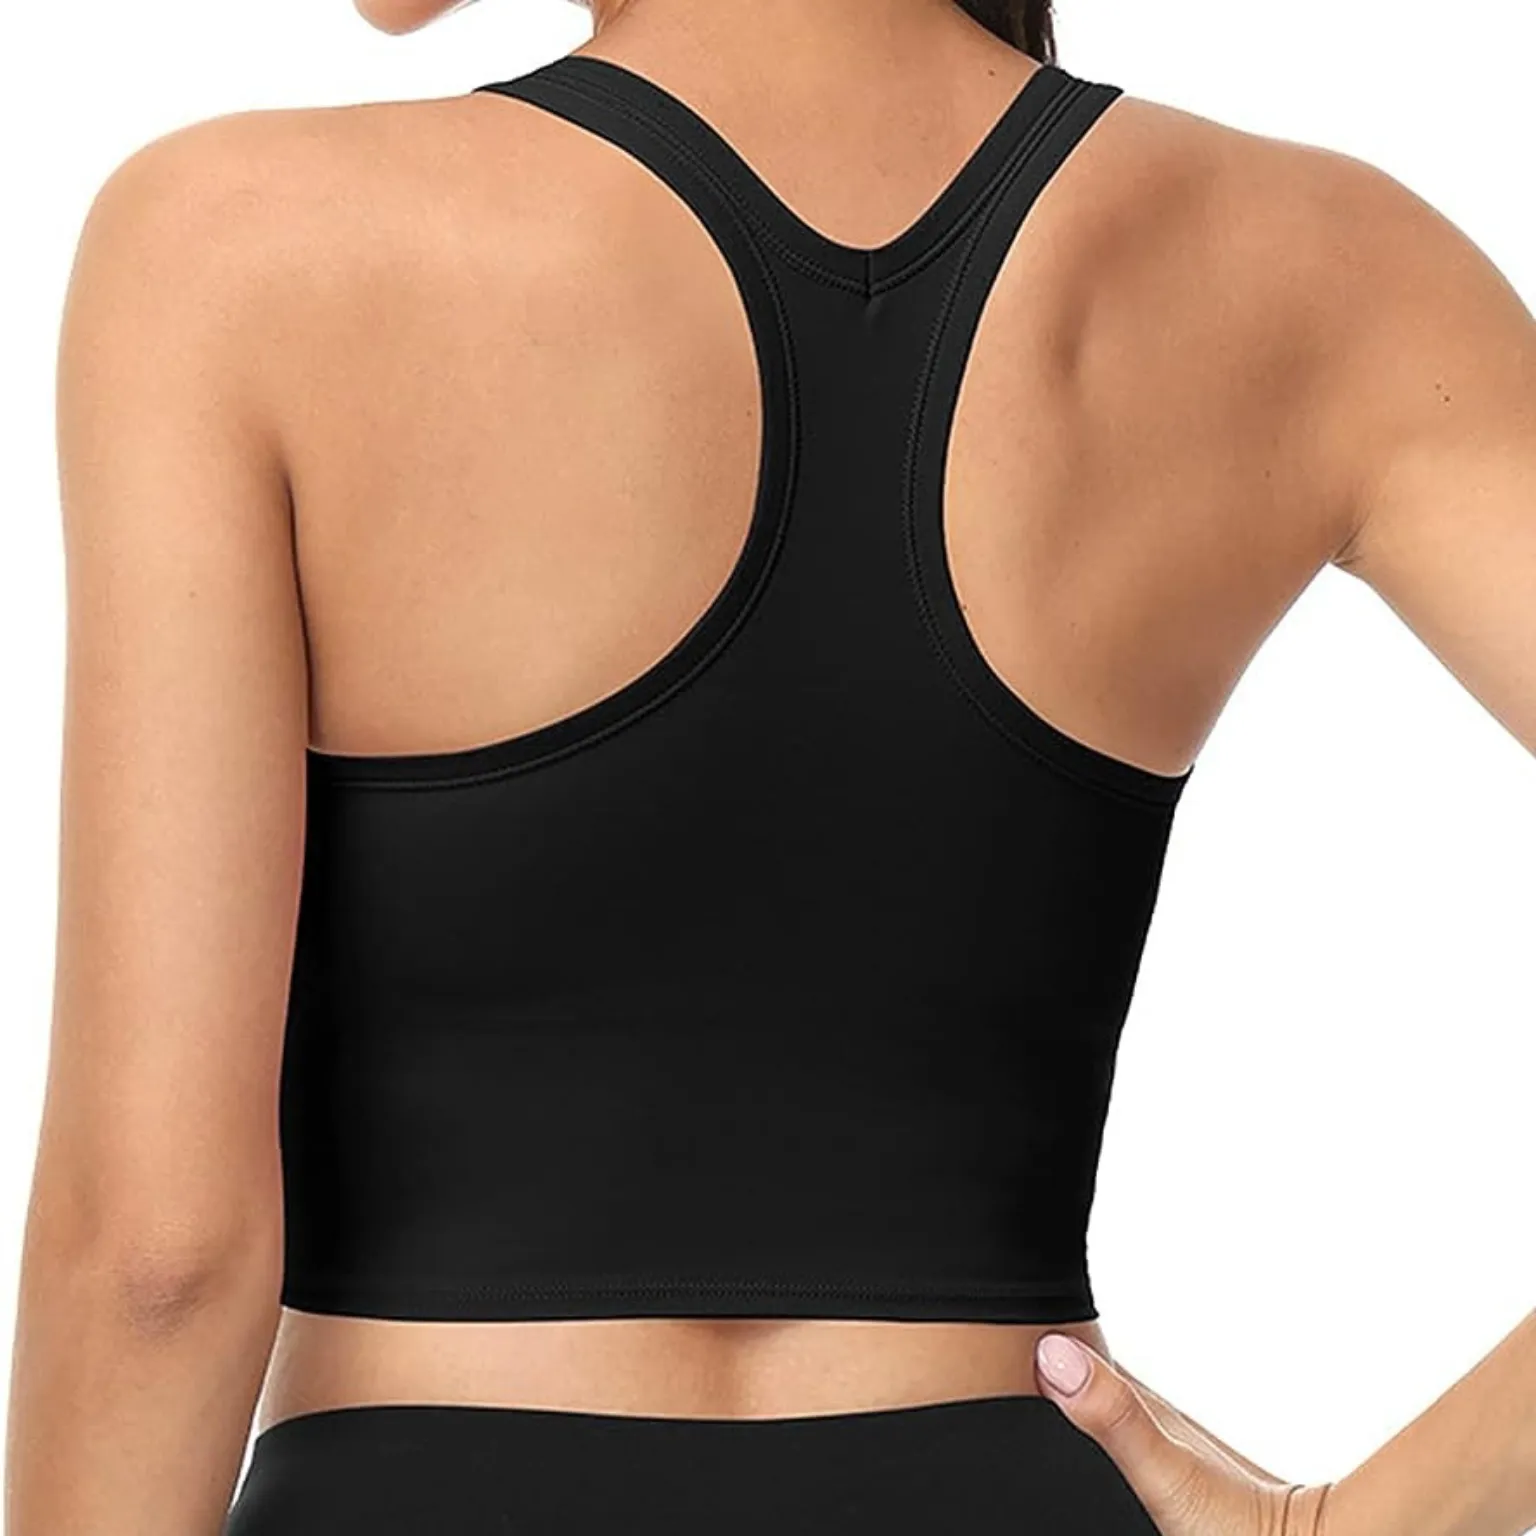 Racerback Sports Bra manufacturing with trendy design